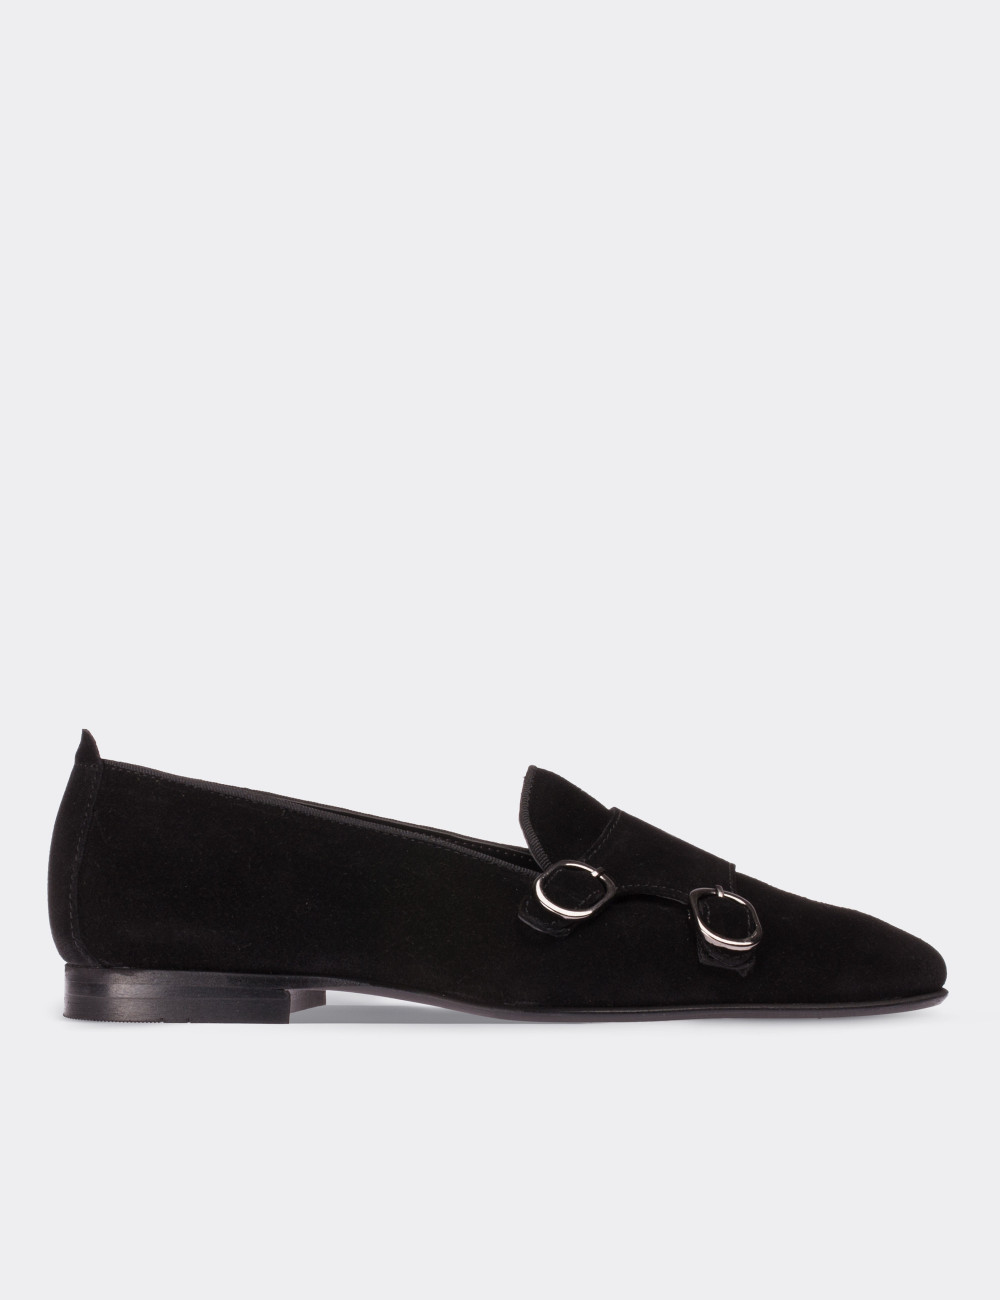 Black Suede Leather Loafers - 01611ZSYHM03